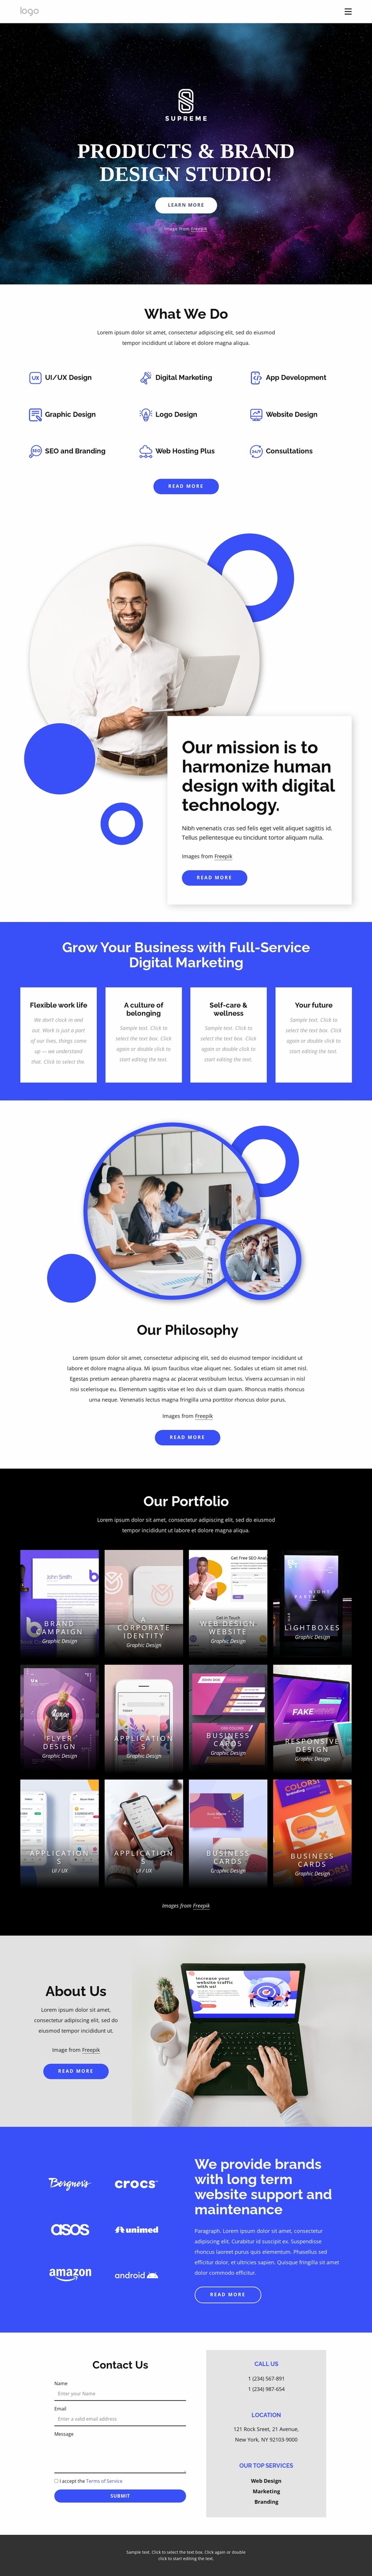 Products and brand design studio Landing Page